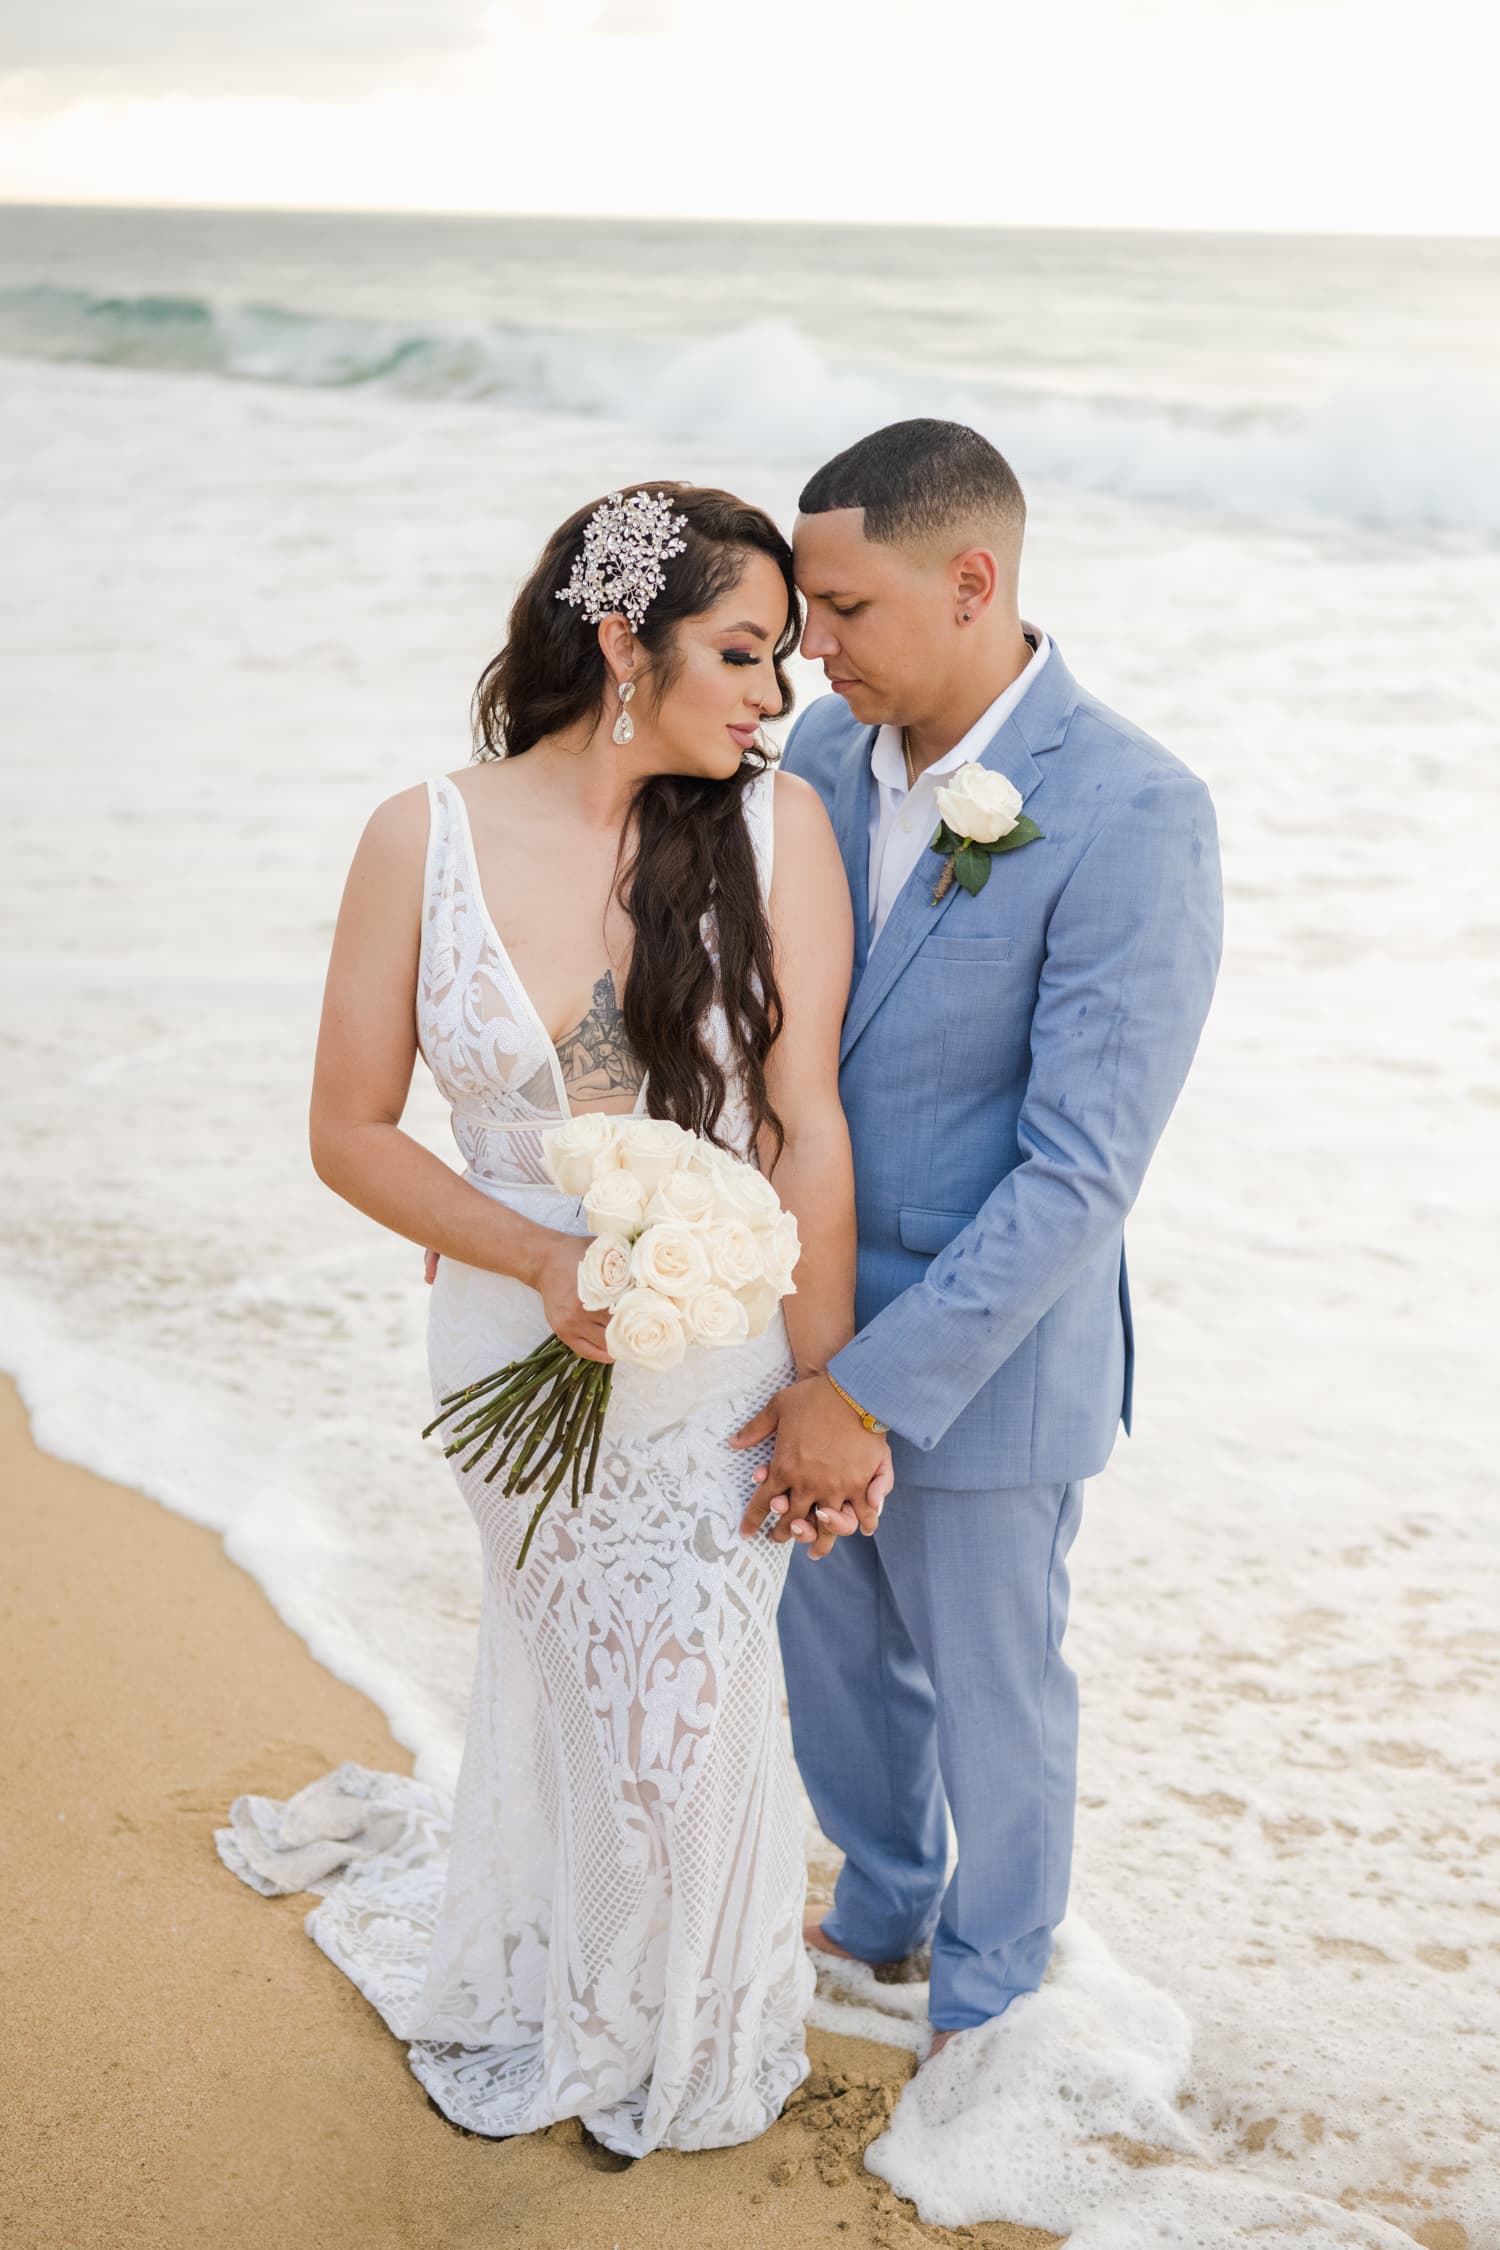 Aisha and Luis had a beautiful, intimate elopement at a beachfront Airbnb in Arecibo, Puerto Rico. One of the many stunning airbnb wedding venues on the Island.